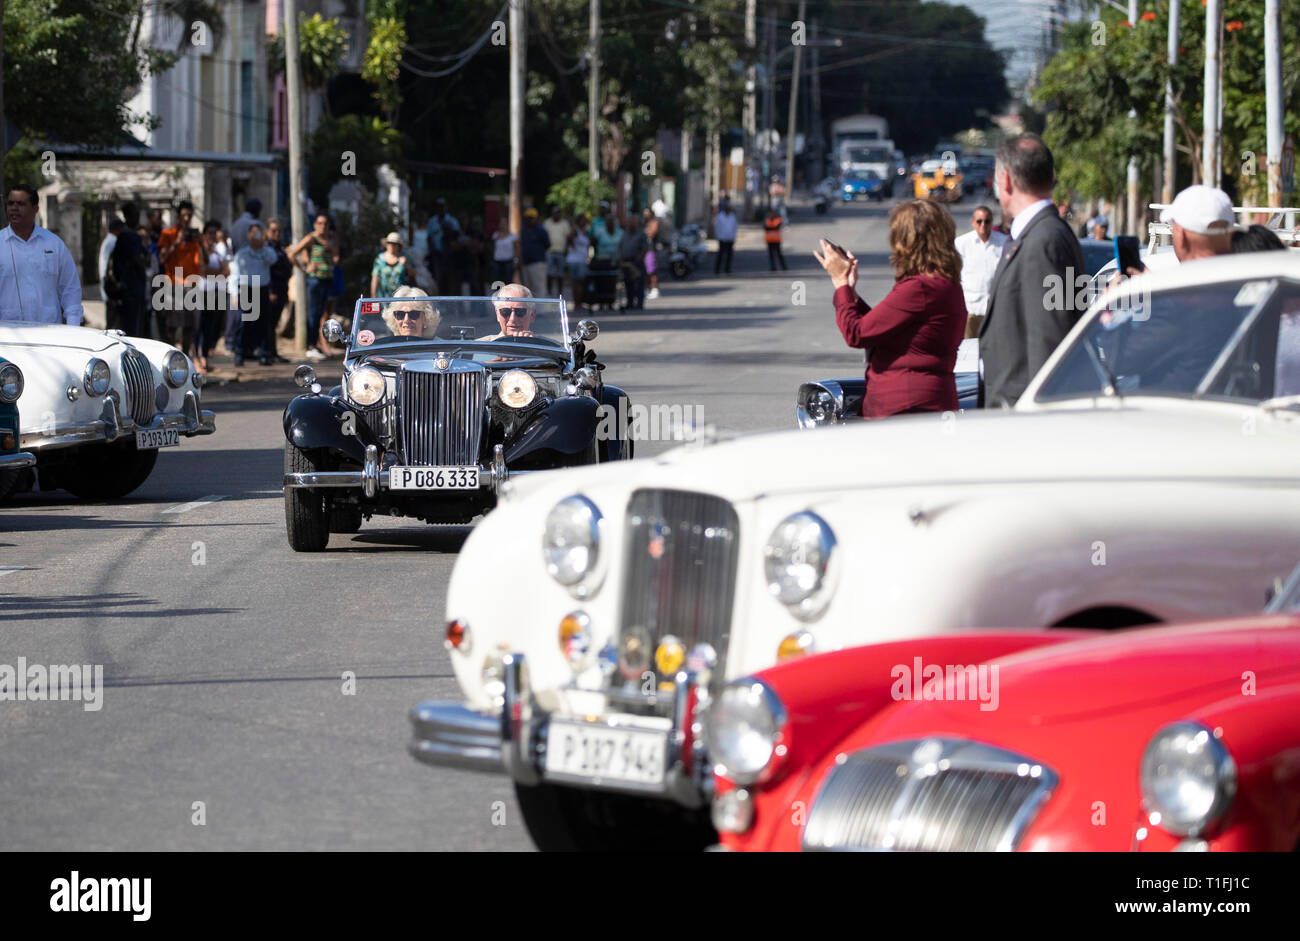 The Prince of Wales and the Duchess of Cornwall ride in an MG TD sportscar from 1953 as they arrive at a British Classic Car event in Havana, Cuba, that is part of an historic trip which celebrates cultural ties between the UK and the Communist state. Stock Photo